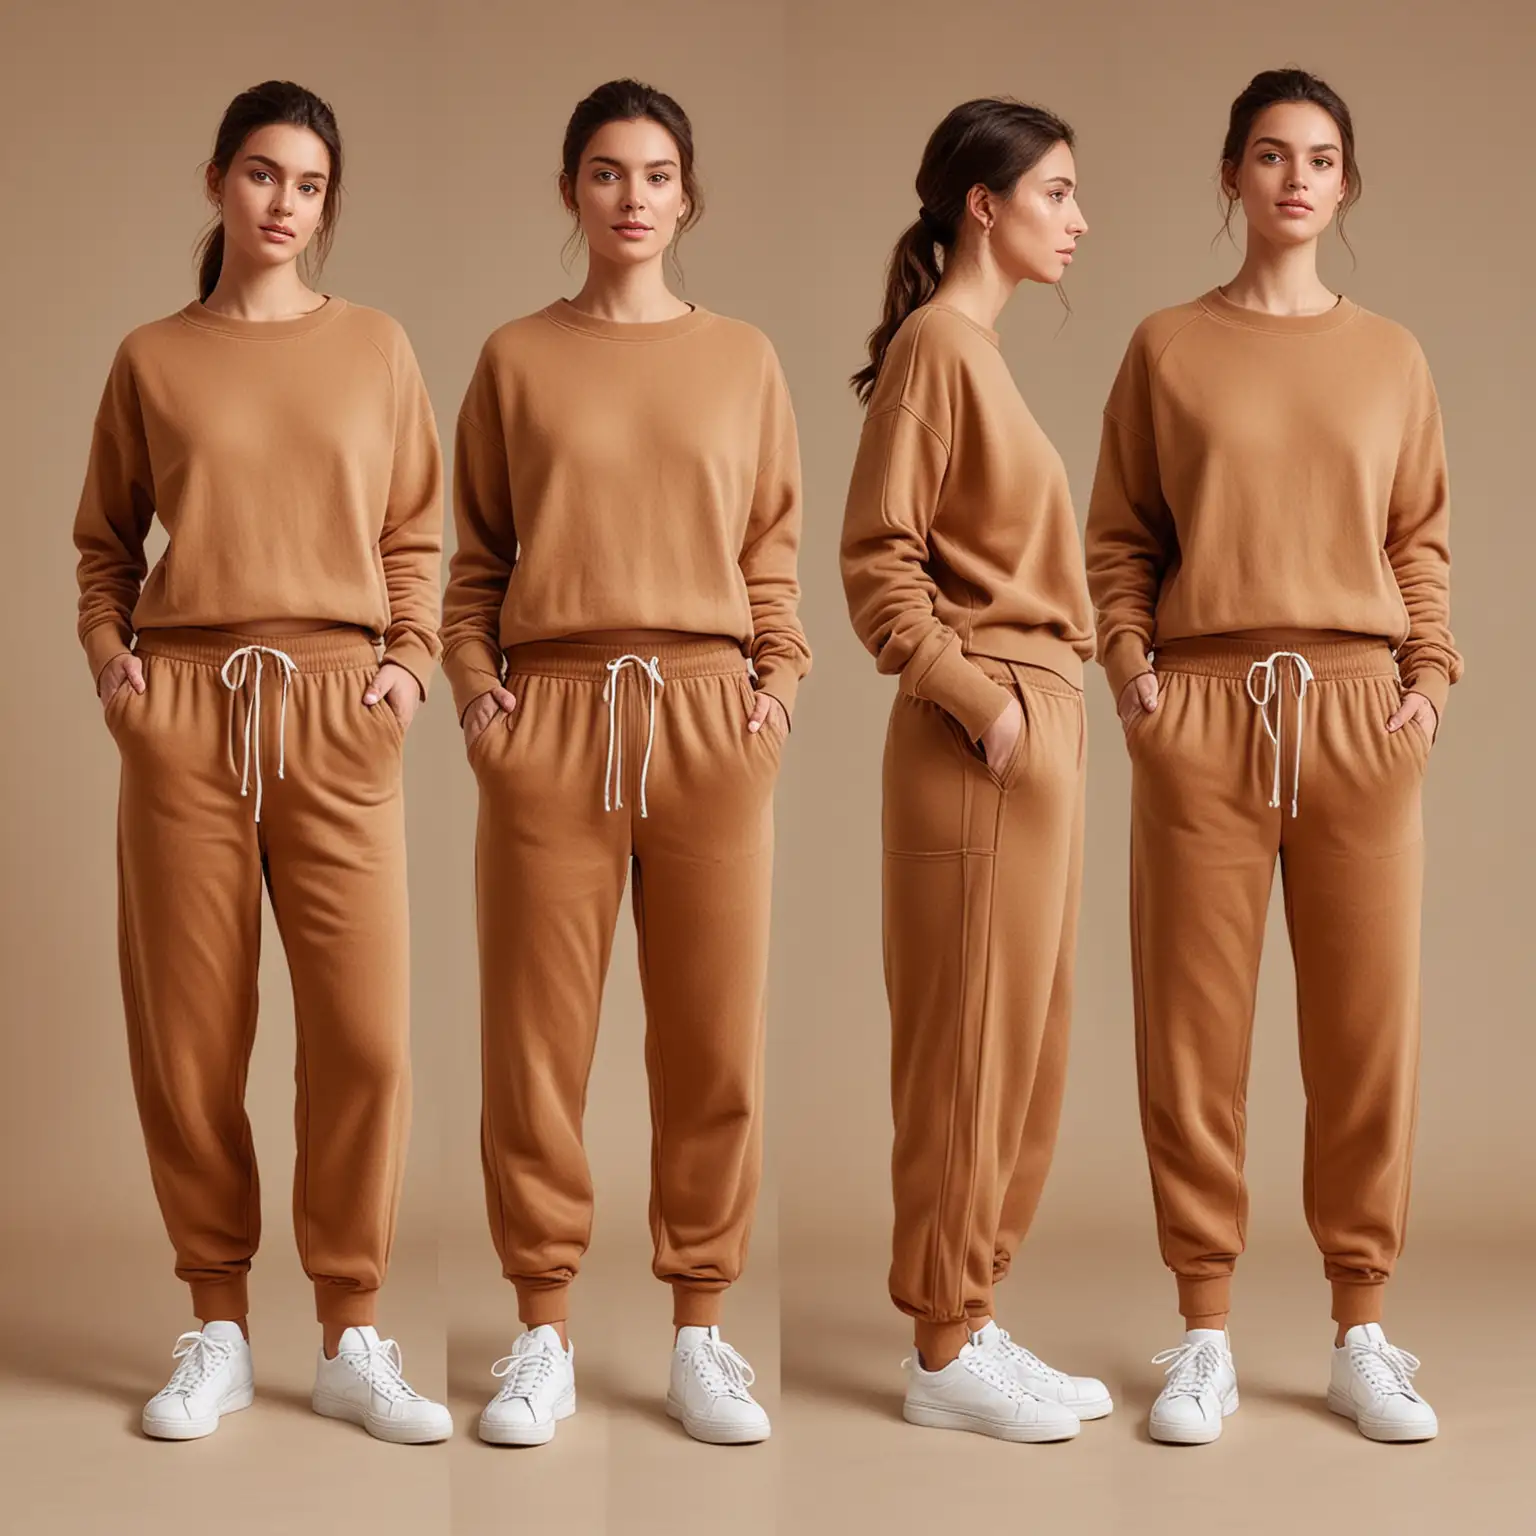 generate image of person wearing brown track pants made of cotton terry from 4 different angles